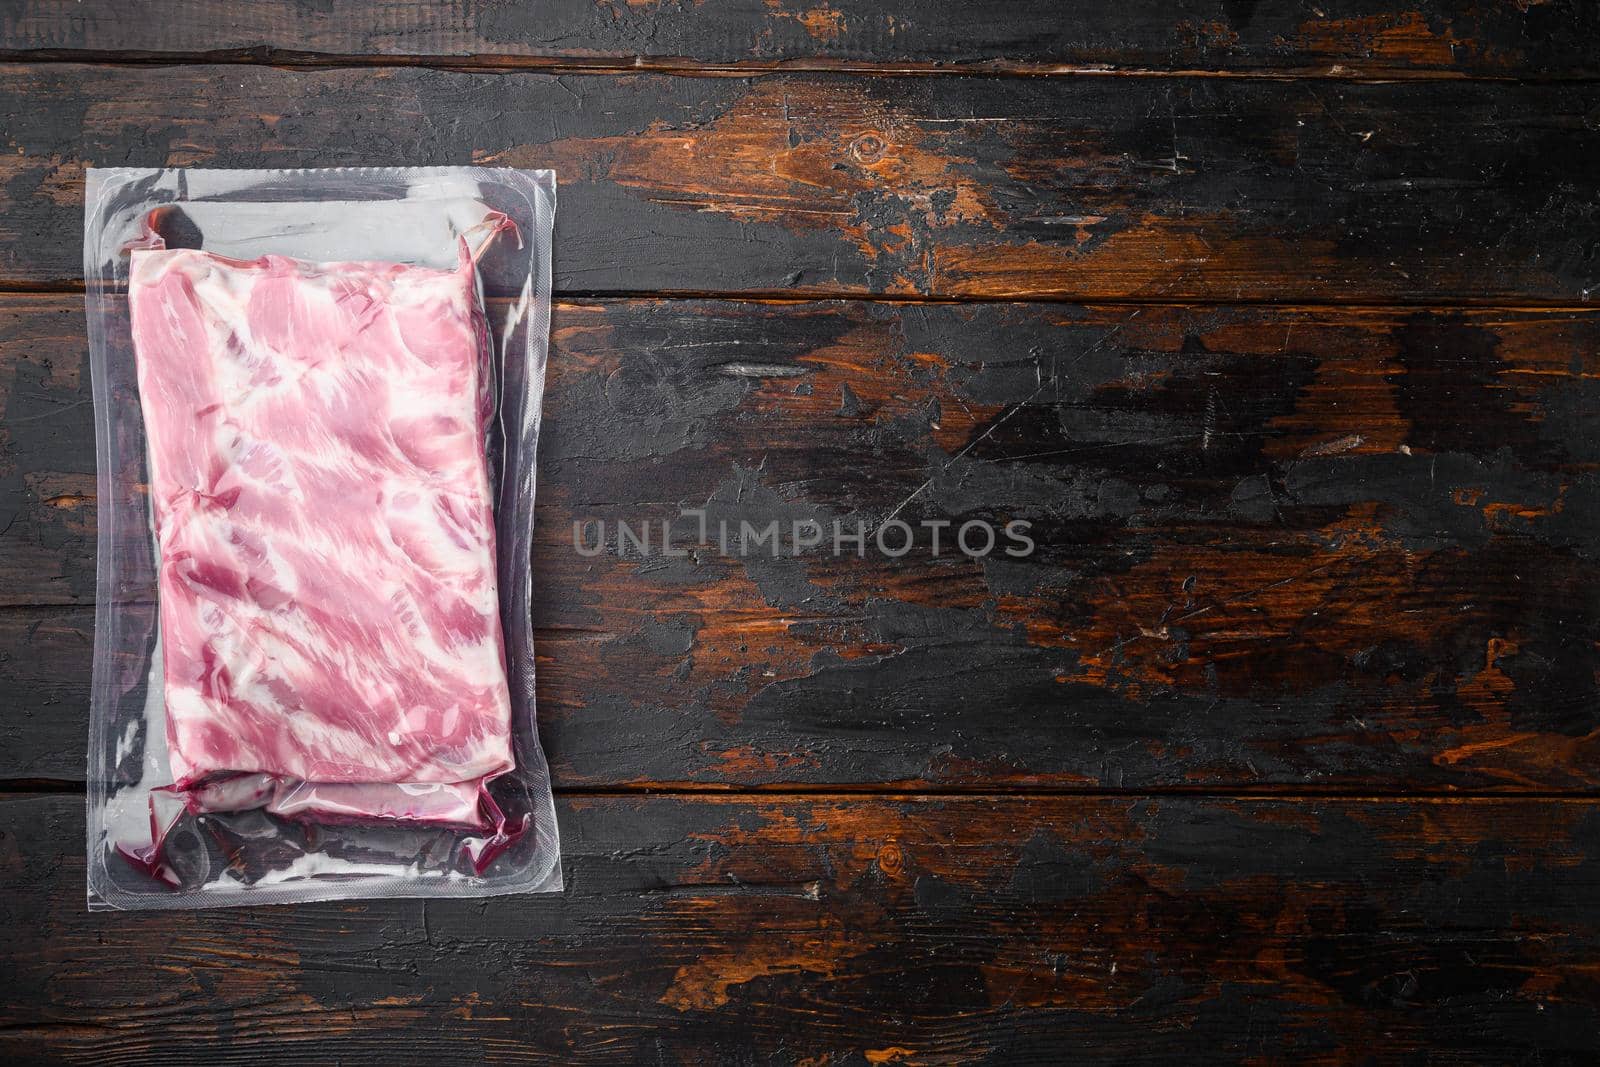 Pork ribs in a vacuum bag set, on old dark wooden table background, top view flat lay, with copy space for text